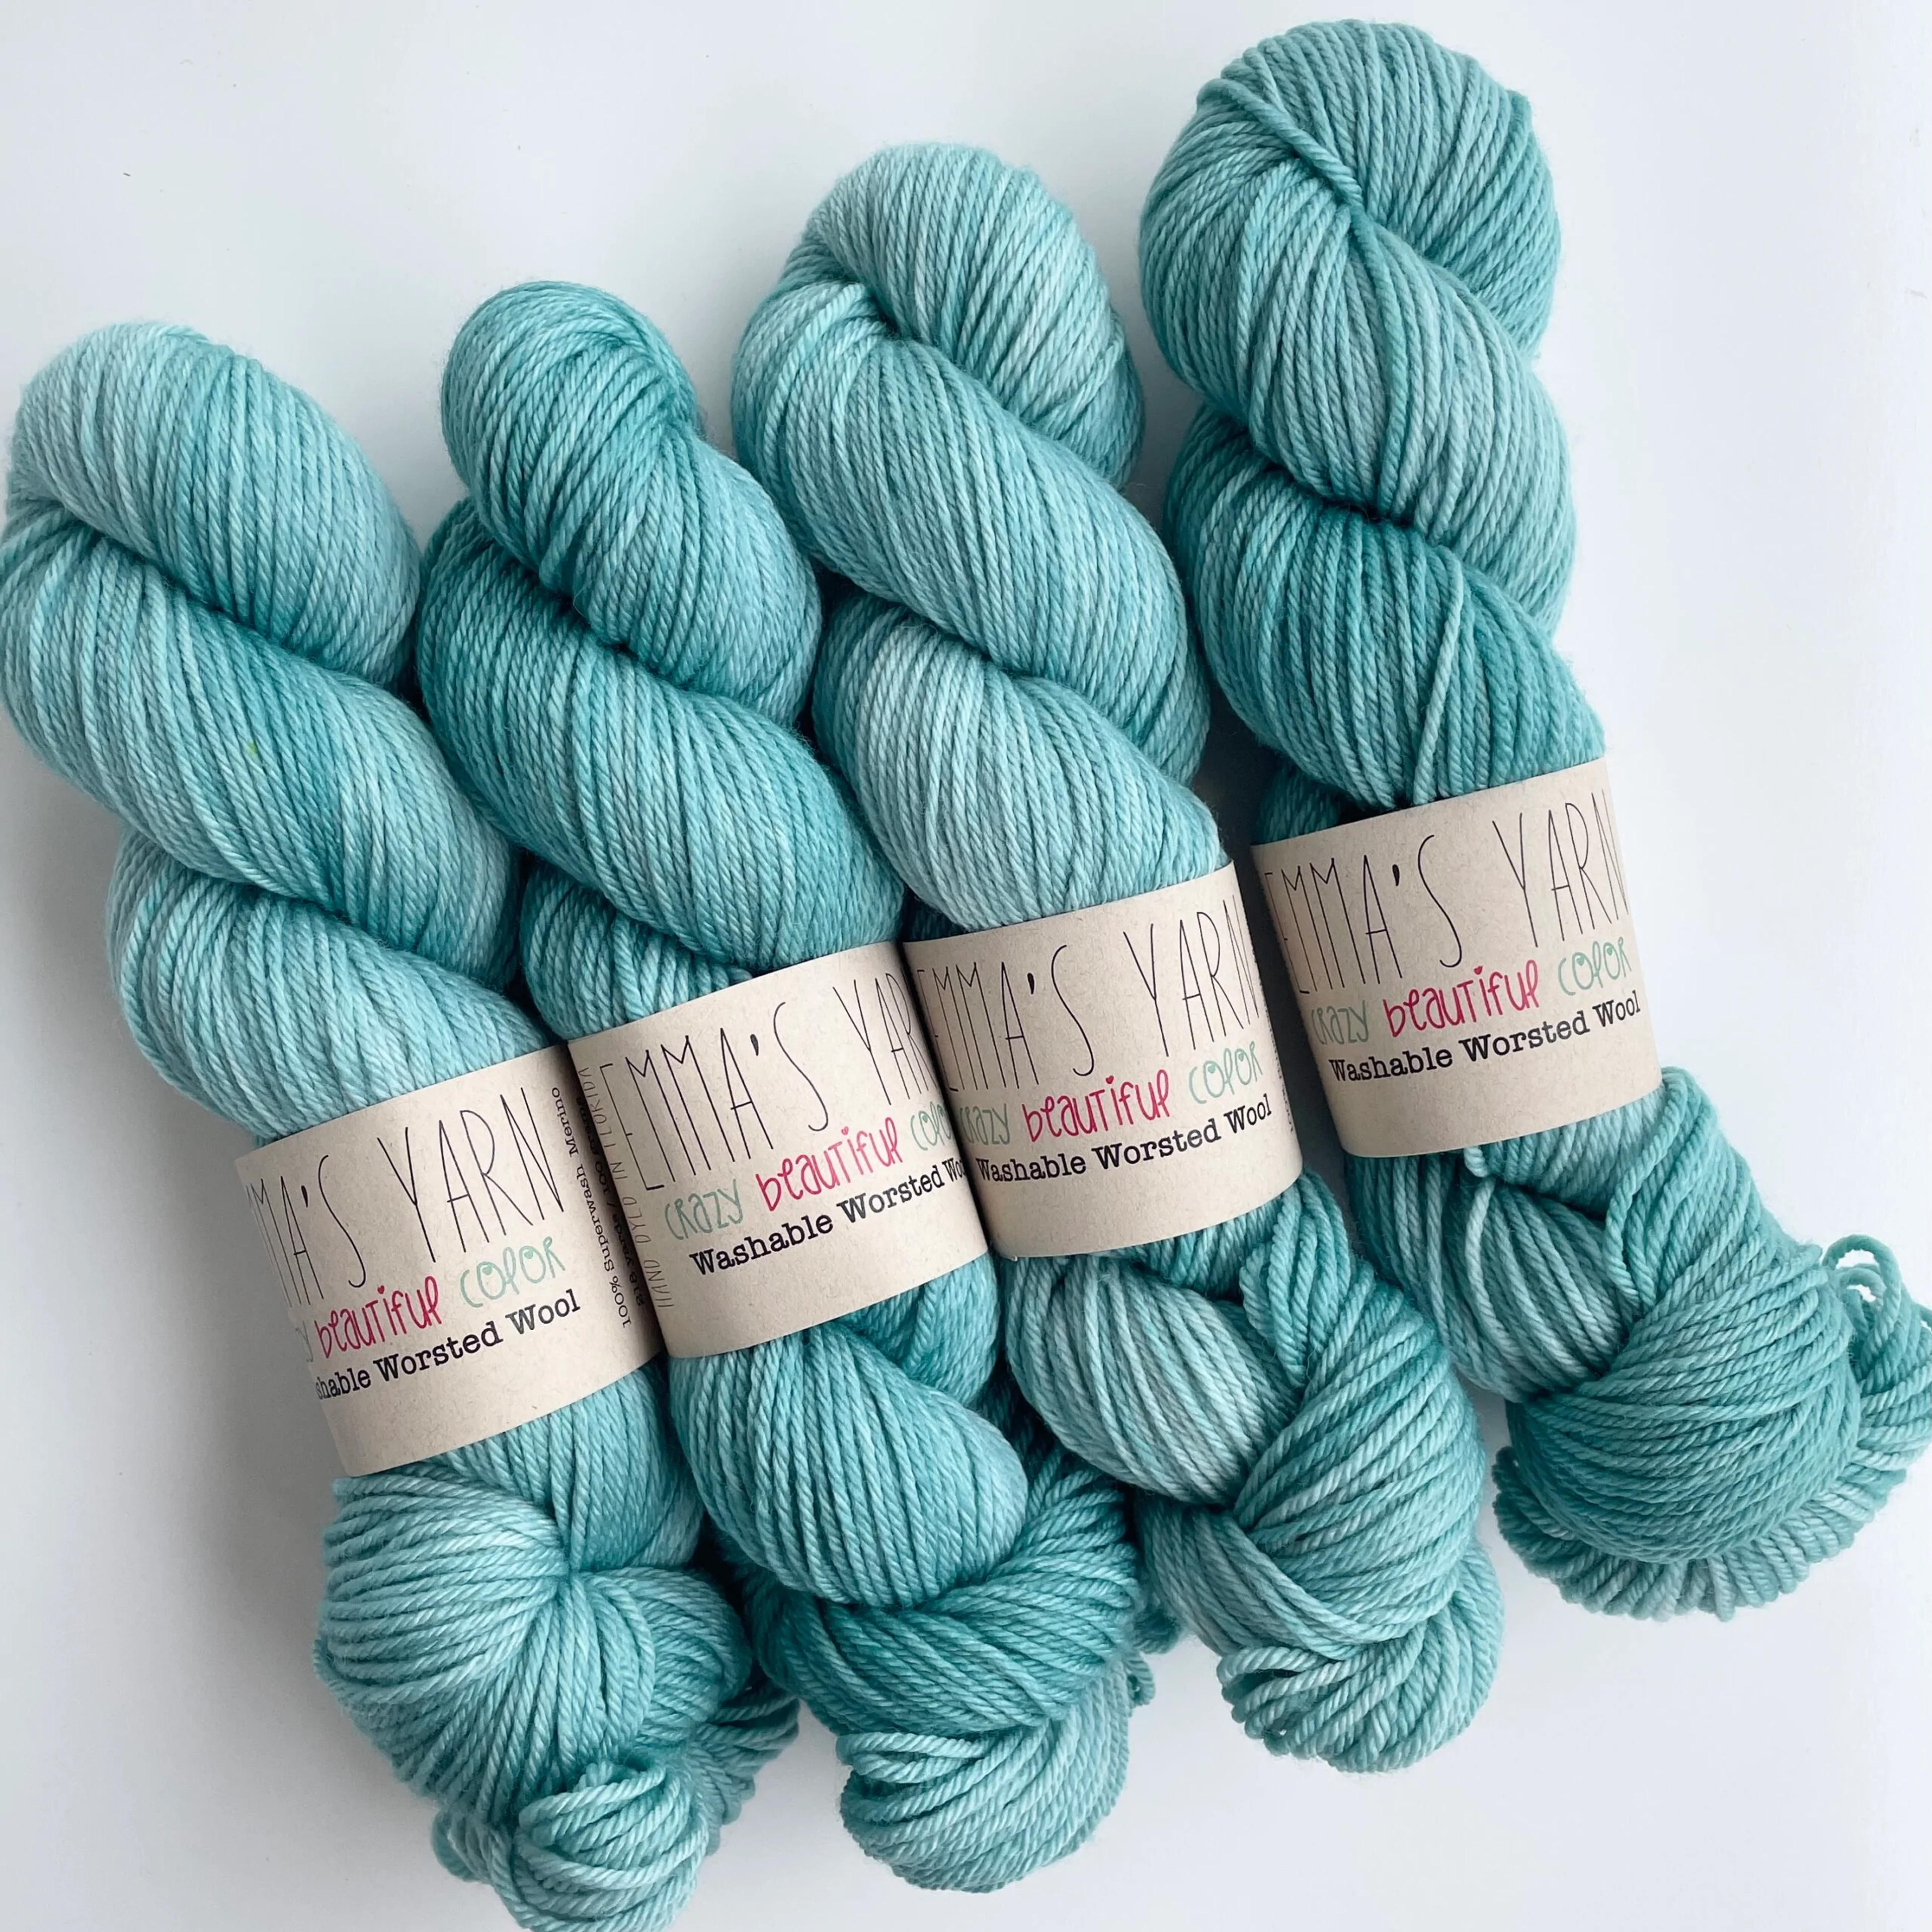 Sea Me Now - Washable Worsted Wool